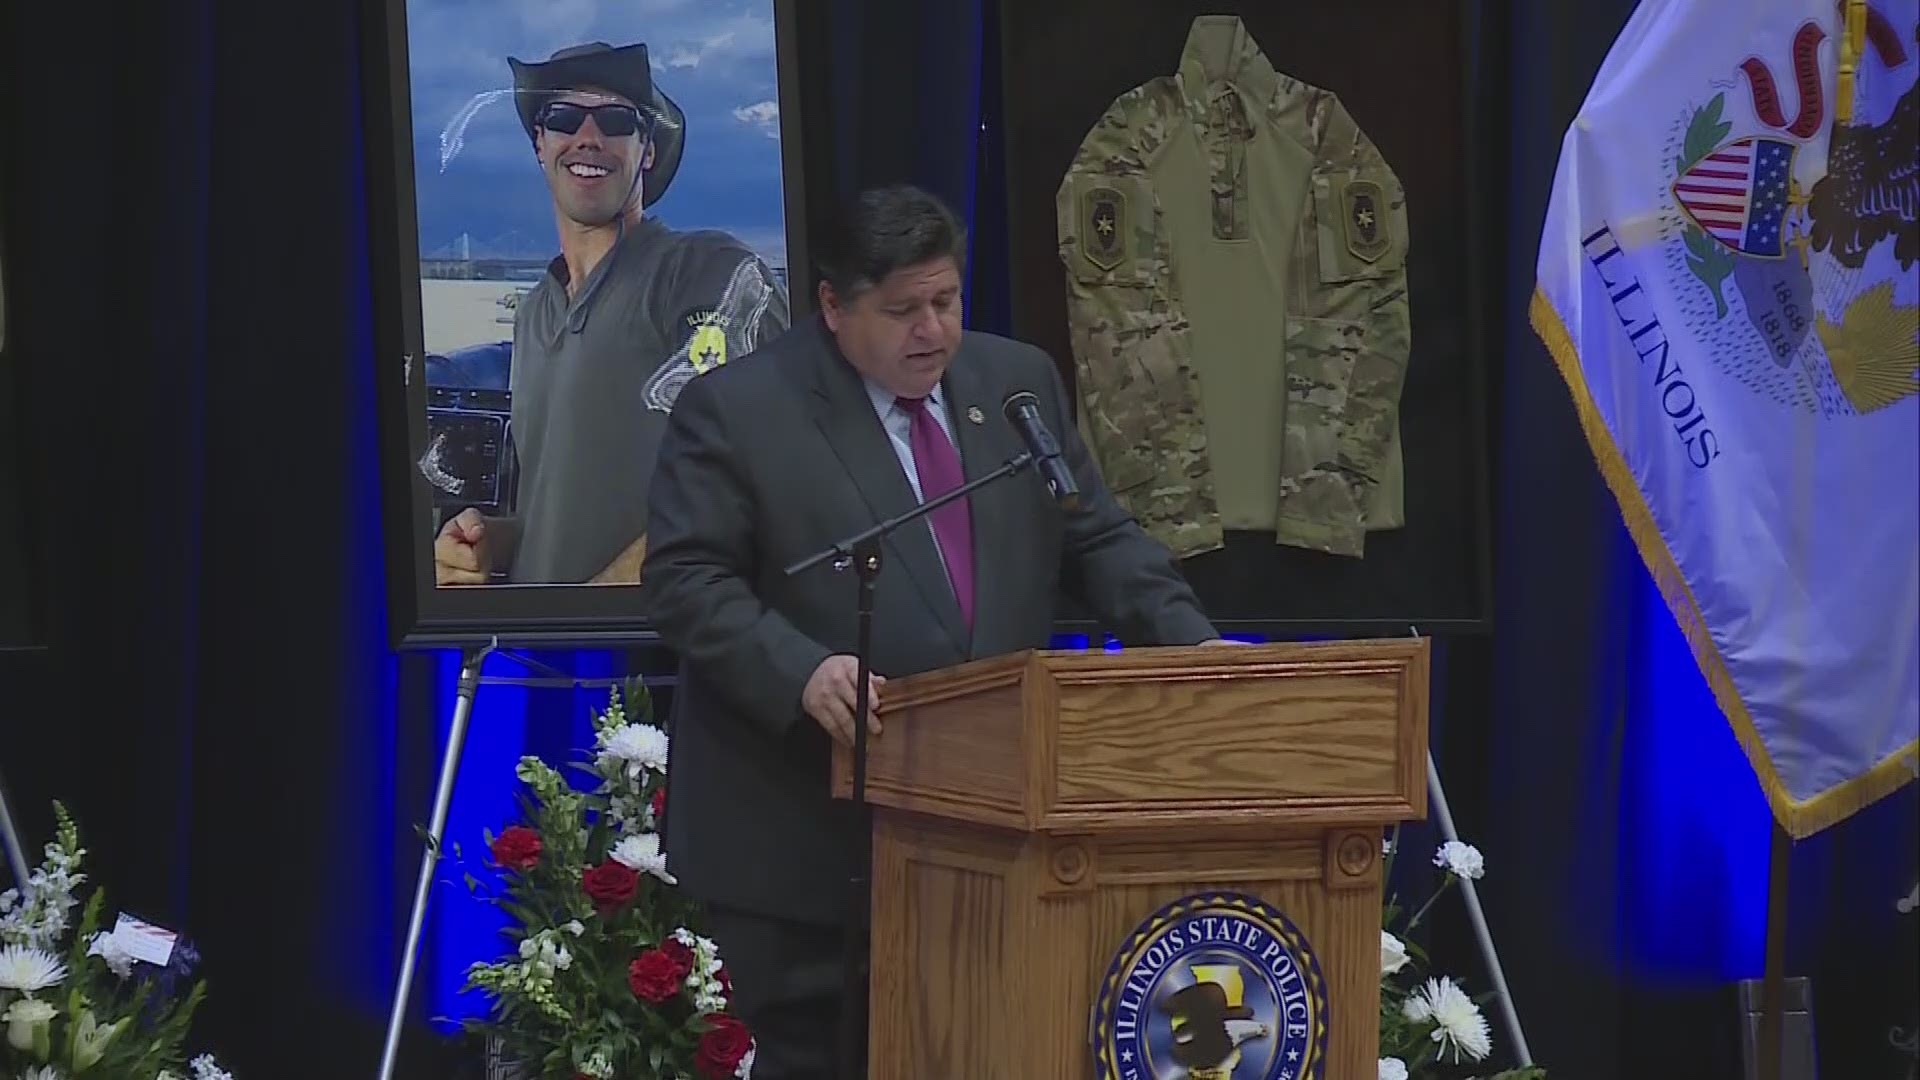 Gov. J.B. Pritzker called Hopkins a hometown hero, adding the people of Illinois "weep for you today."